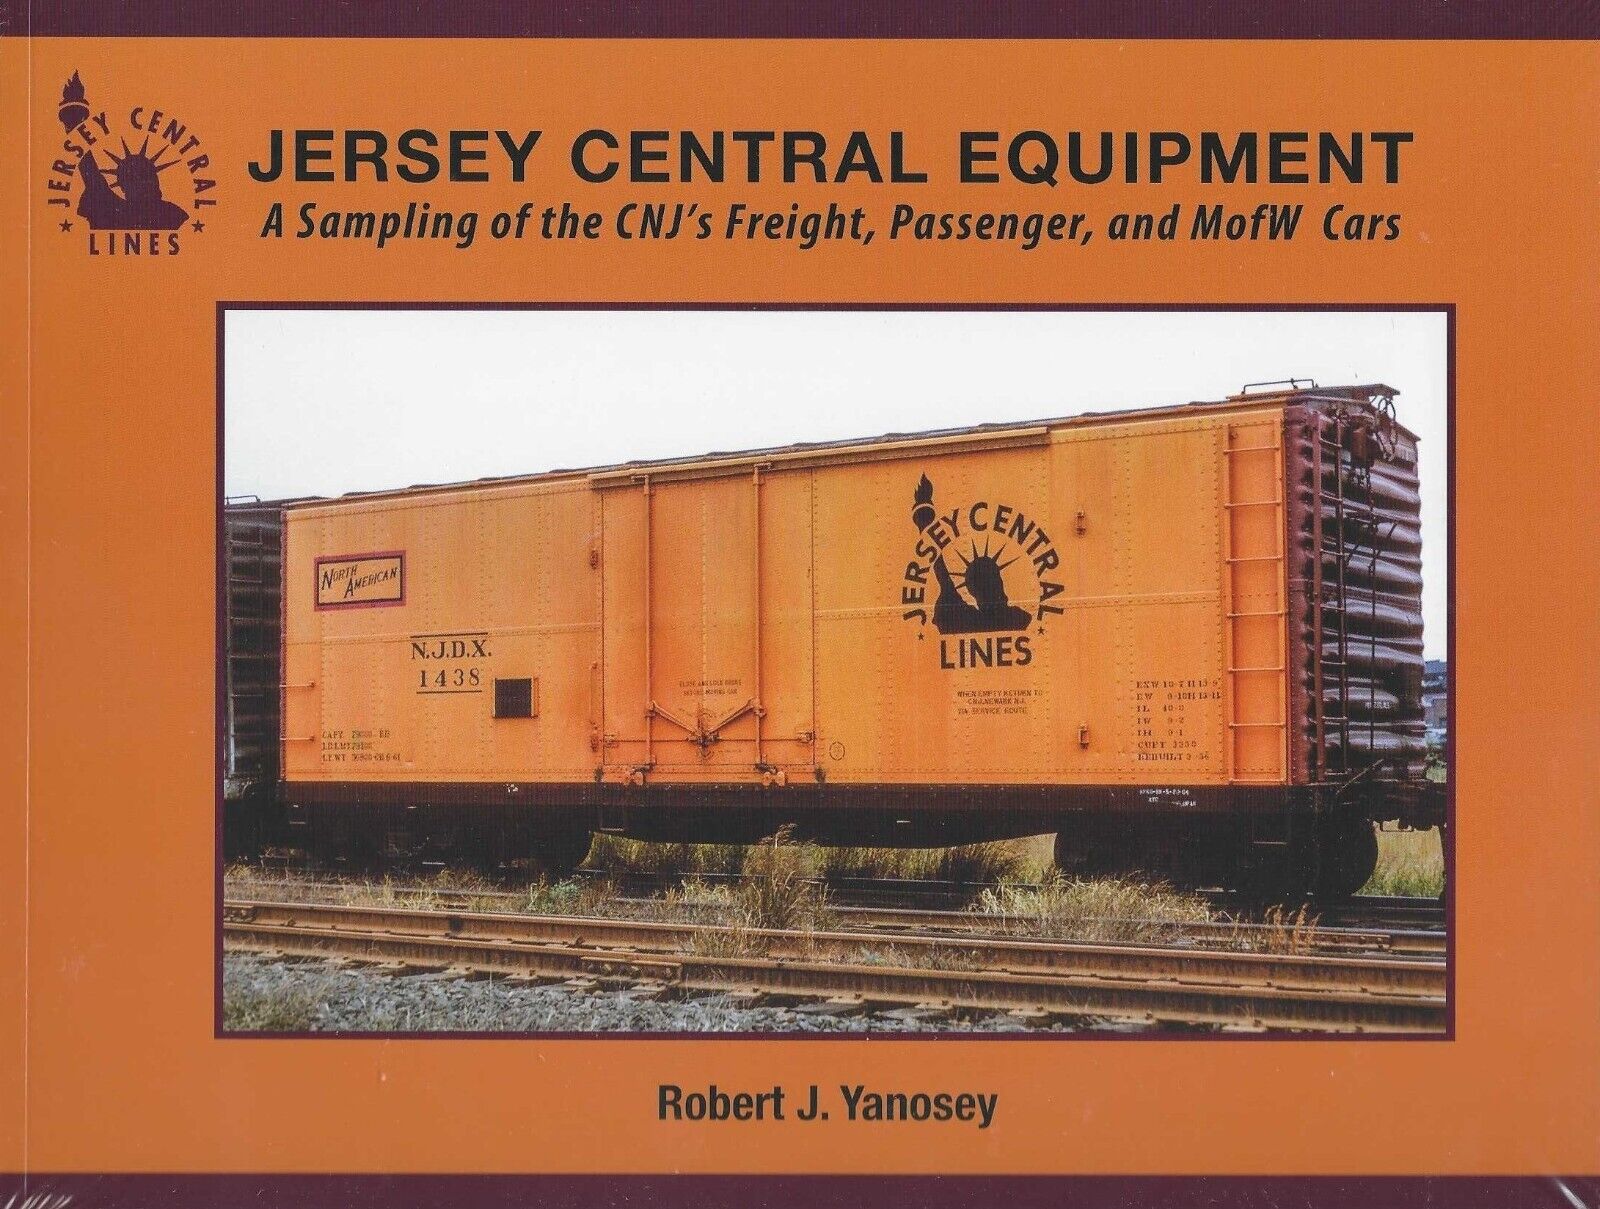 JERSEY CENTRAL EQUIPMENT, A Sampling of CNJ's Freight, Passenger, MofW Cars, NEW